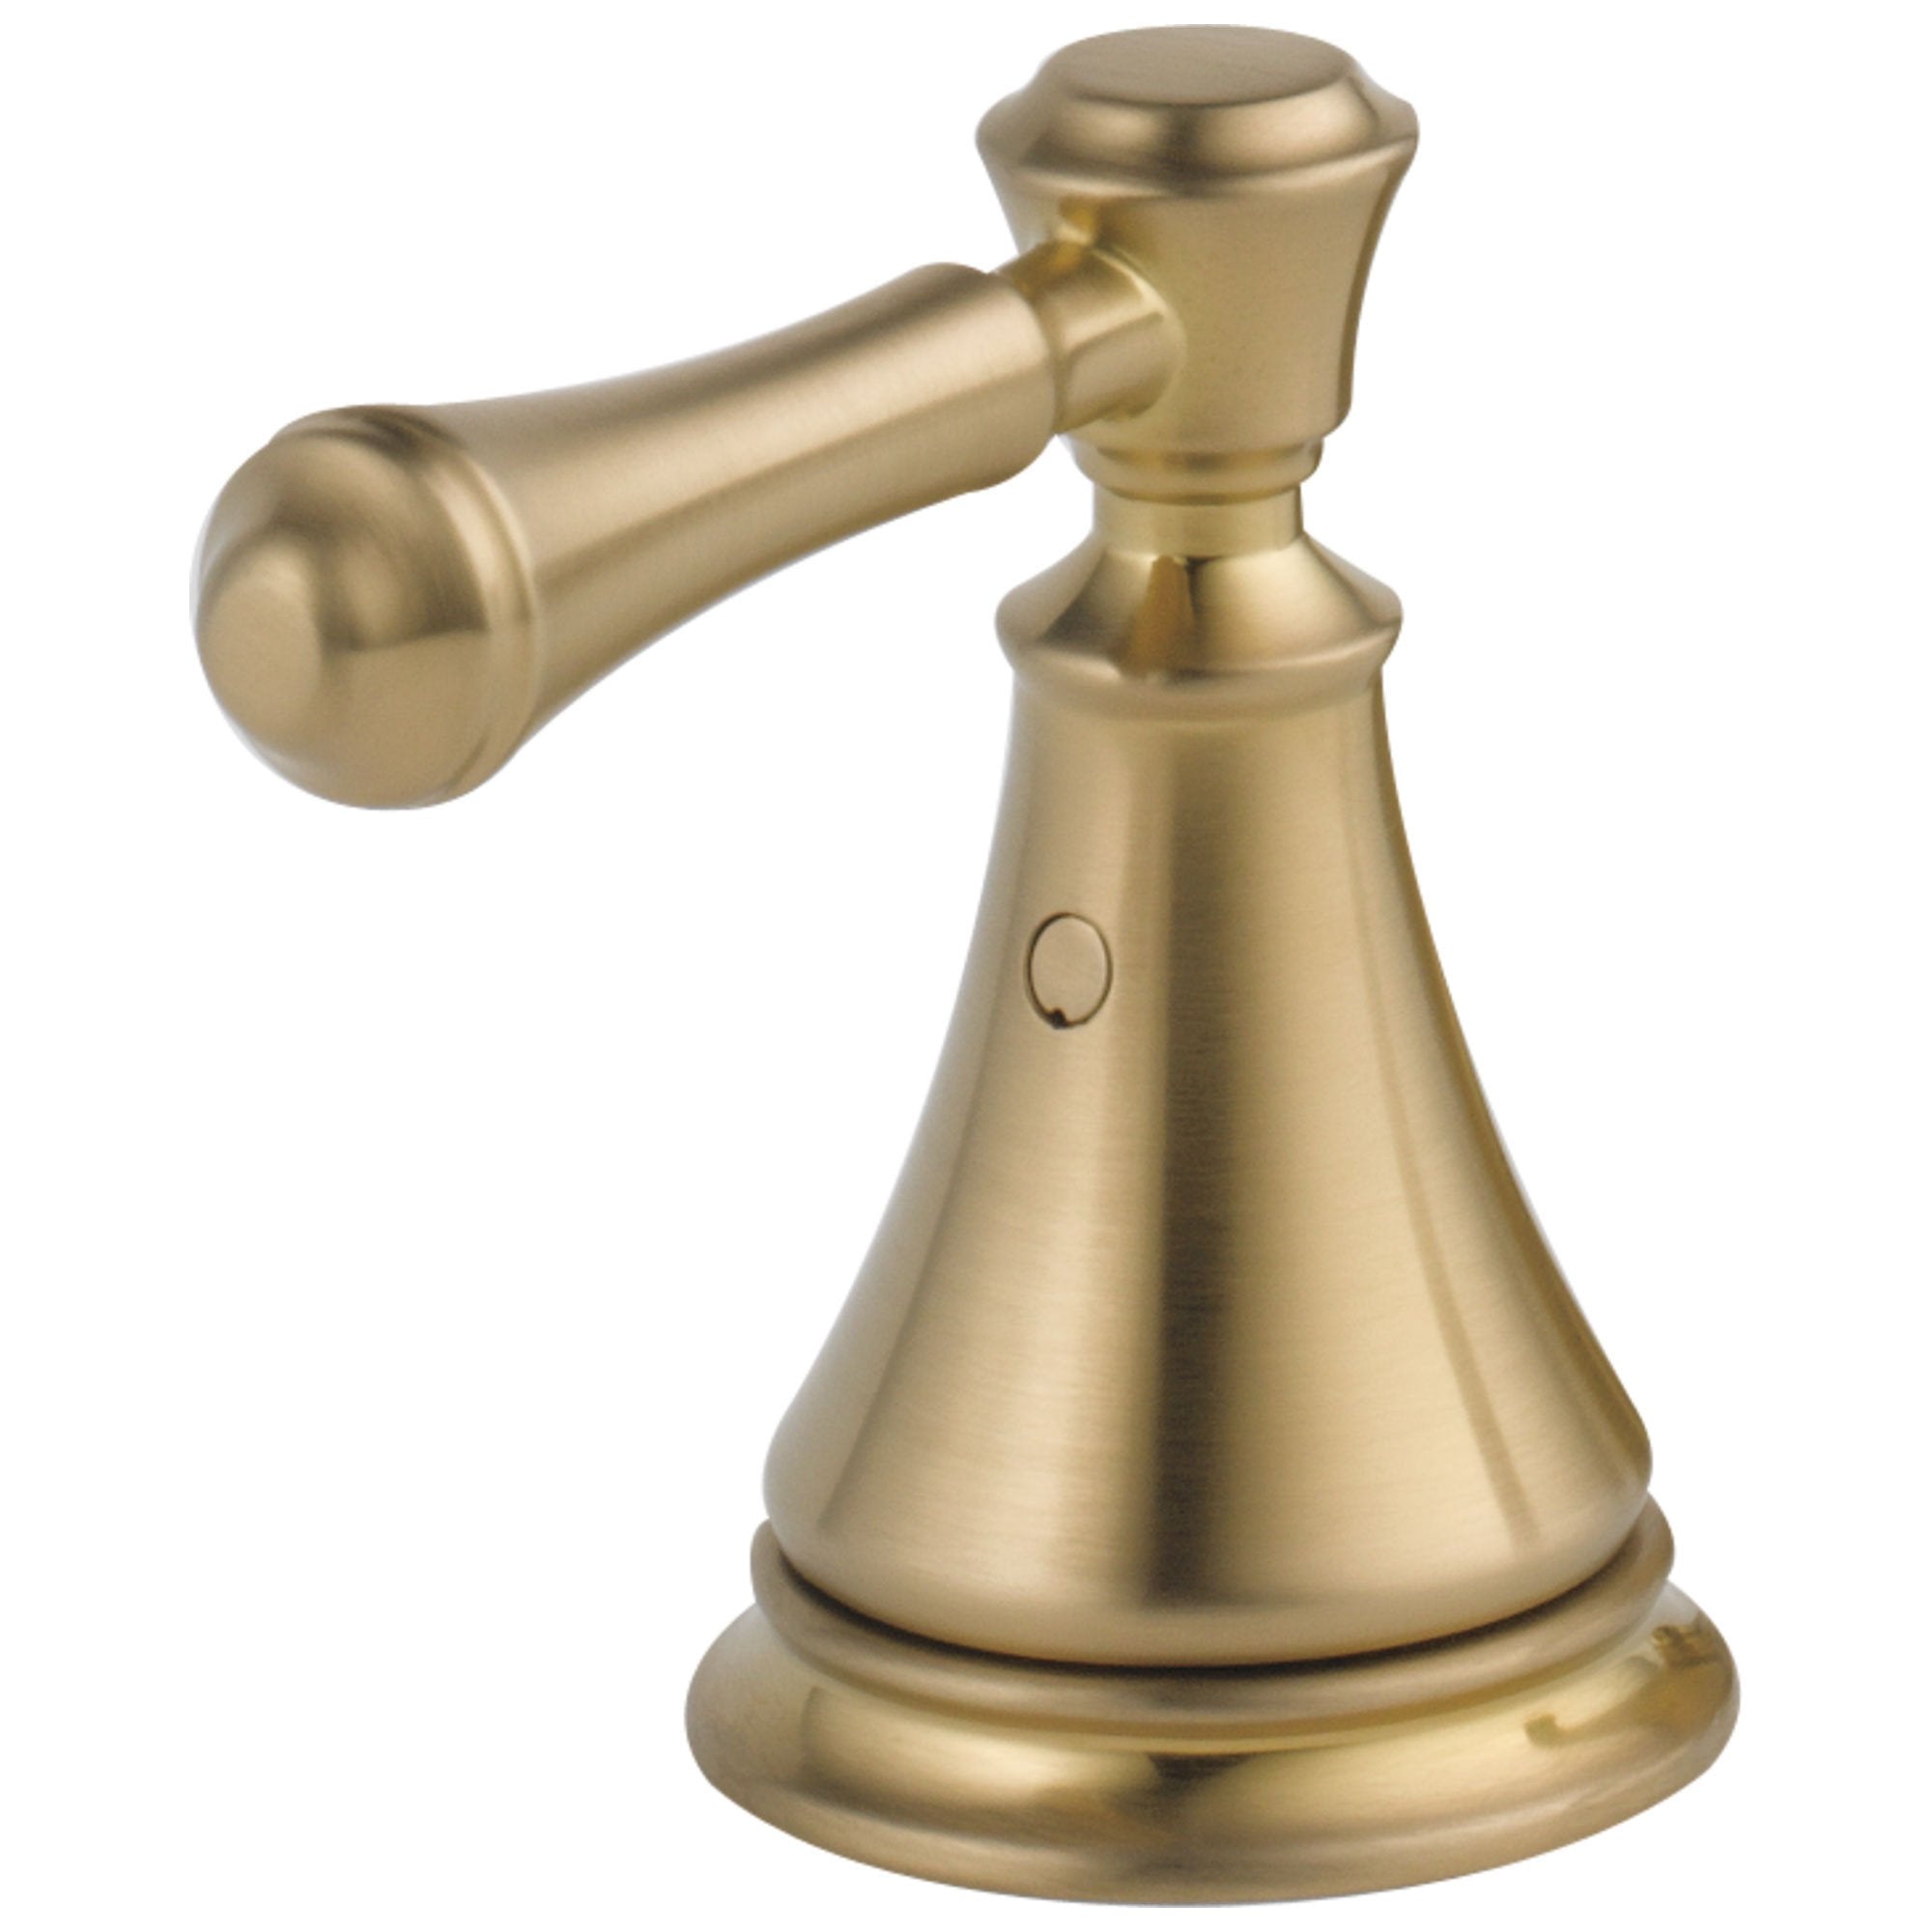 Delta Cassidy Collection Champagne Bronze Finish Lavatory Lever Handles - Quantity 2 Included 579611